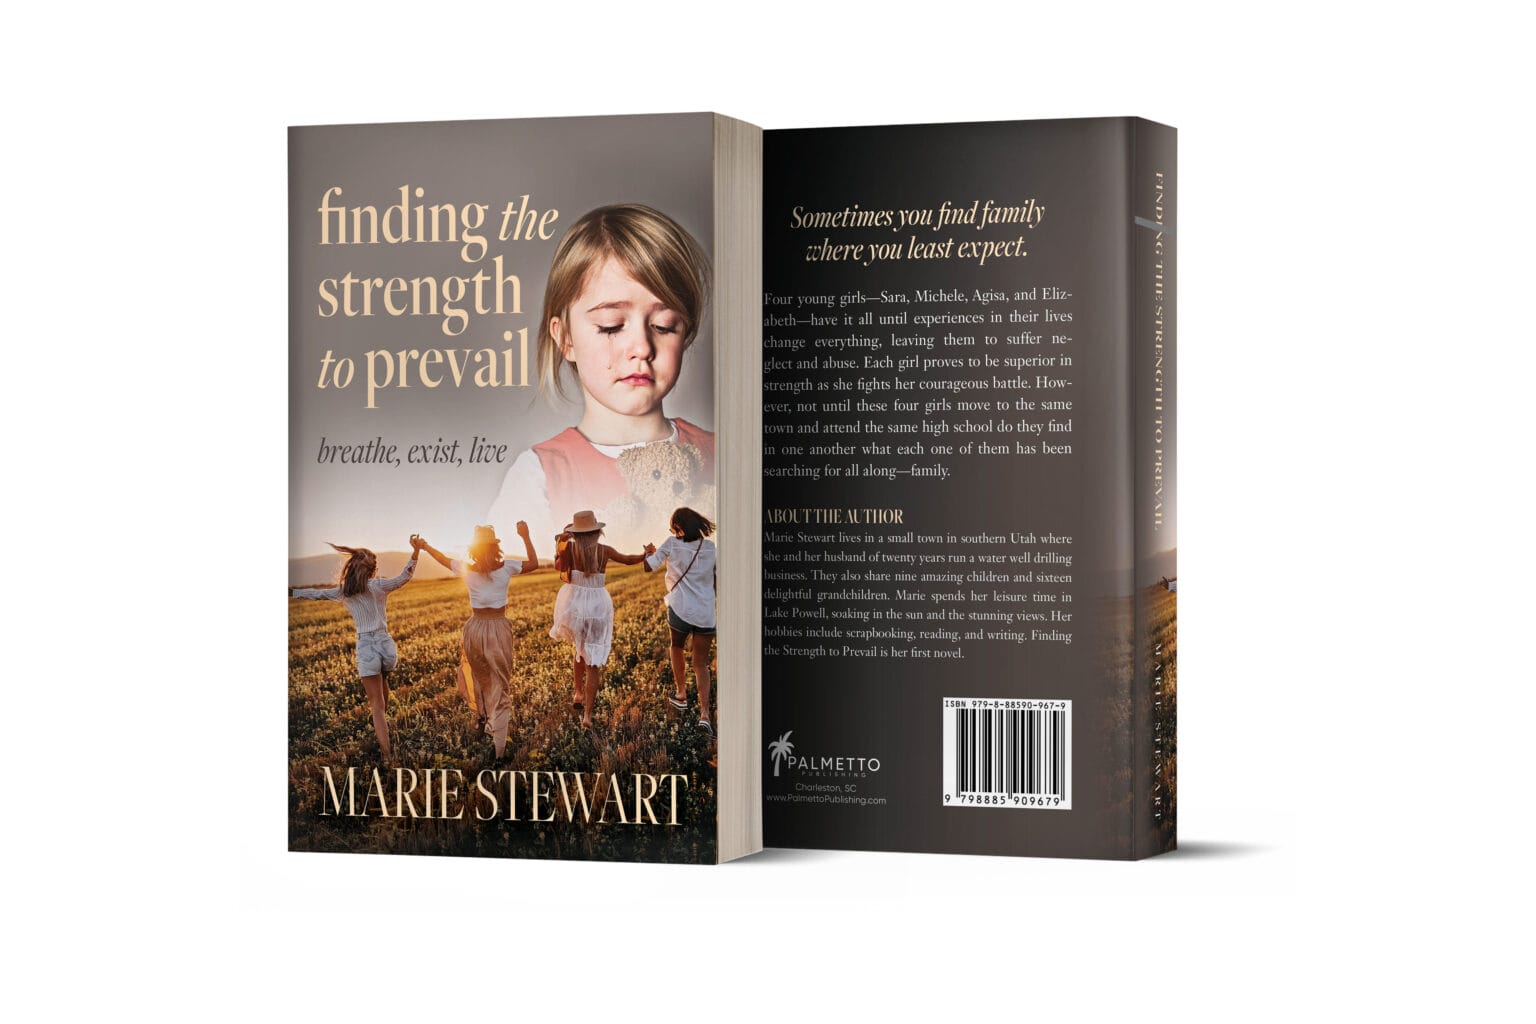 ‘Finding the Strength to Prevail’, by Marie Stewart